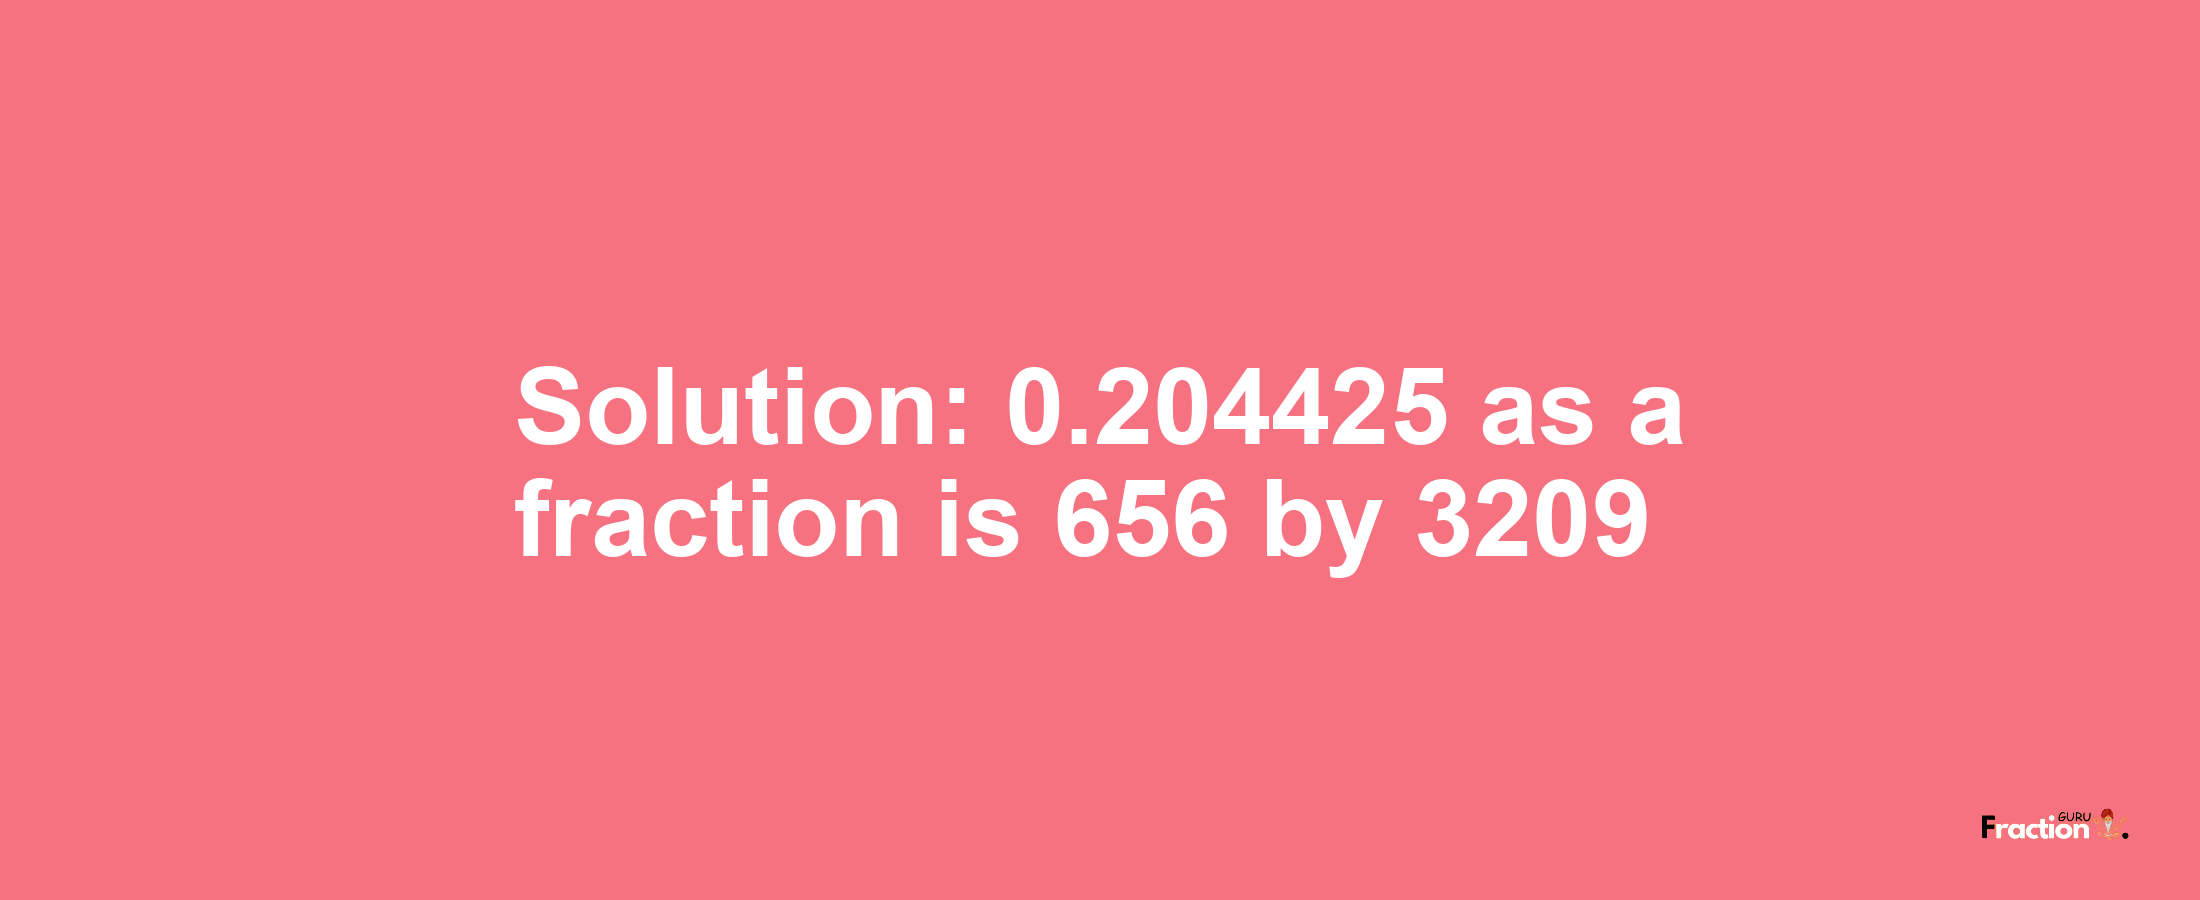 Solution:0.204425 as a fraction is 656/3209